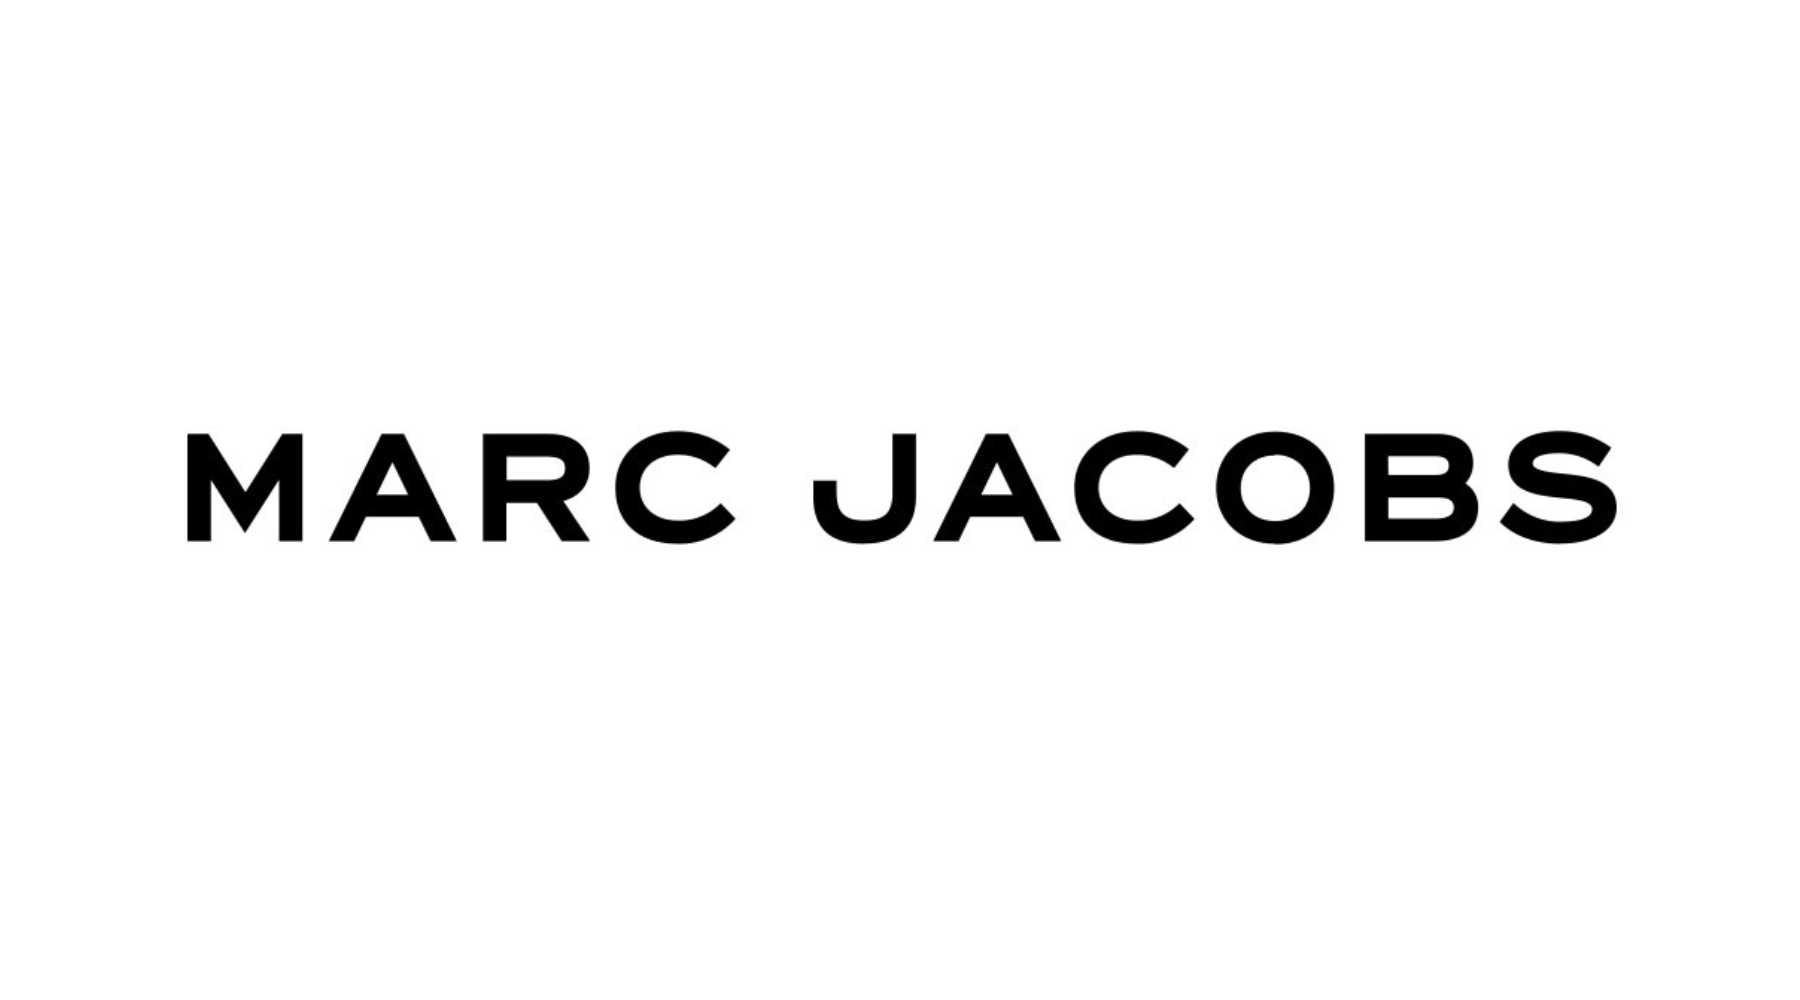 Logo of Marc Jacobs